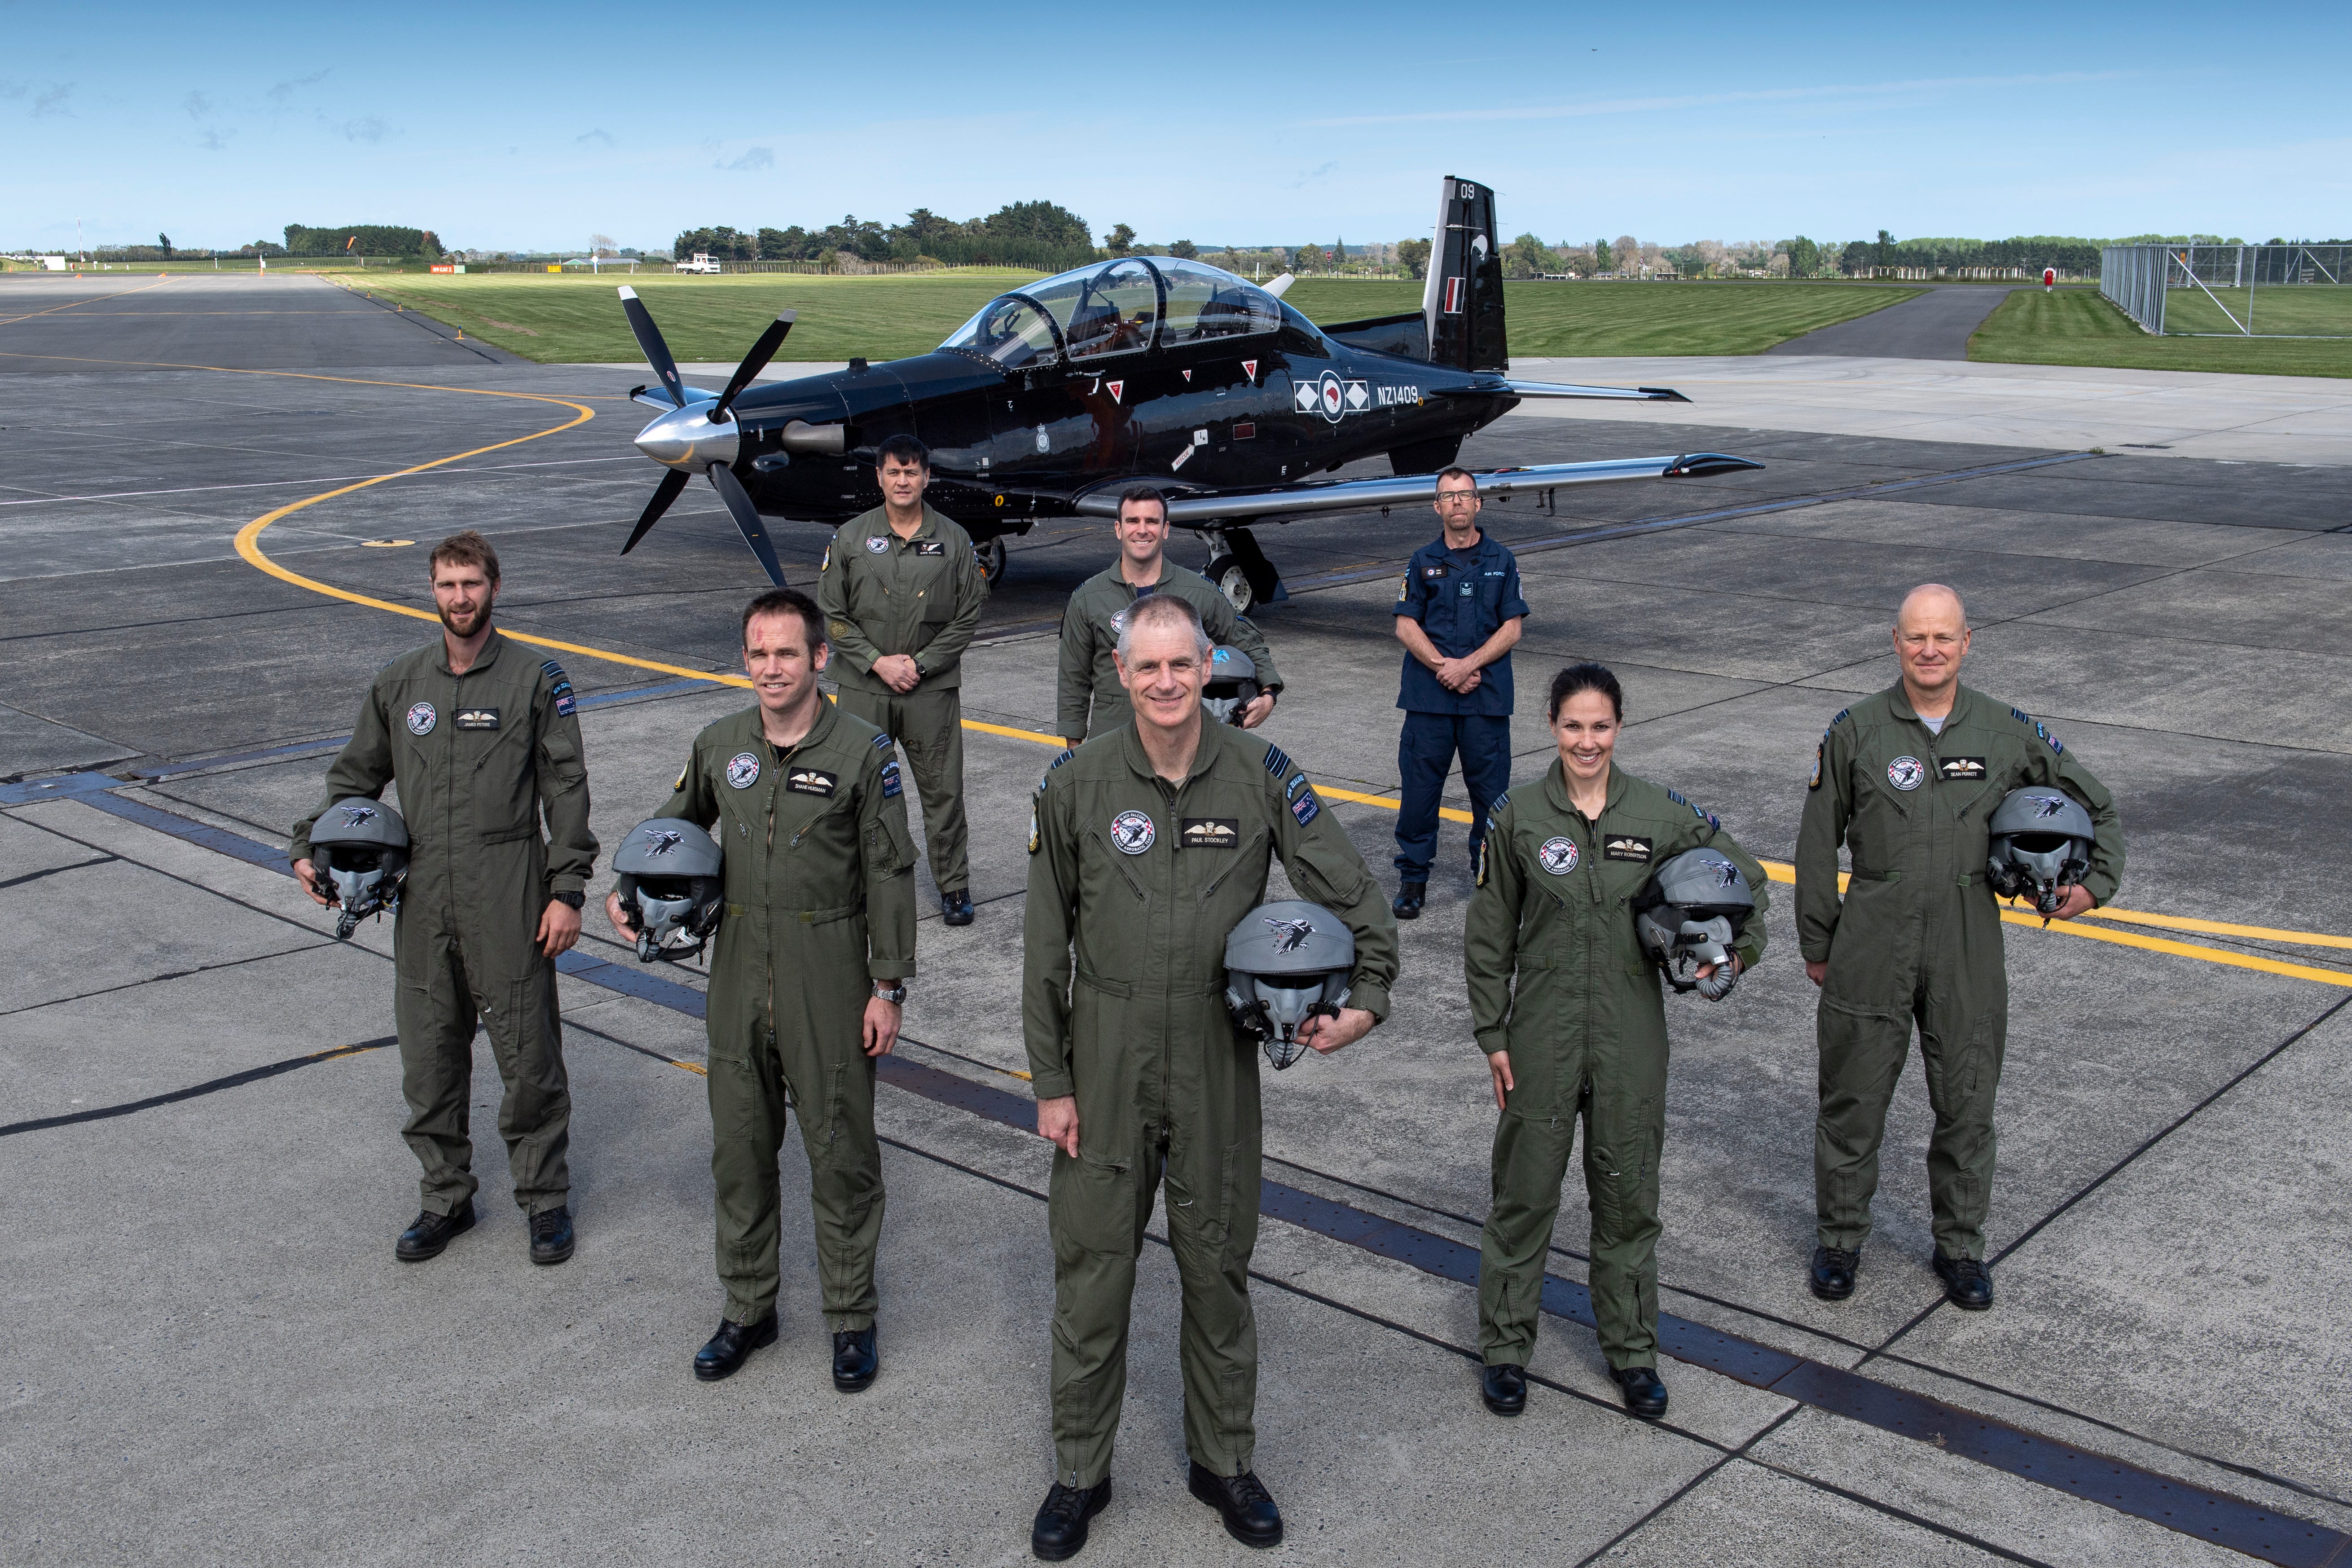 New Black Falcons Air Force aerobatics team announced | by New Zealand  Defence Force | Medium